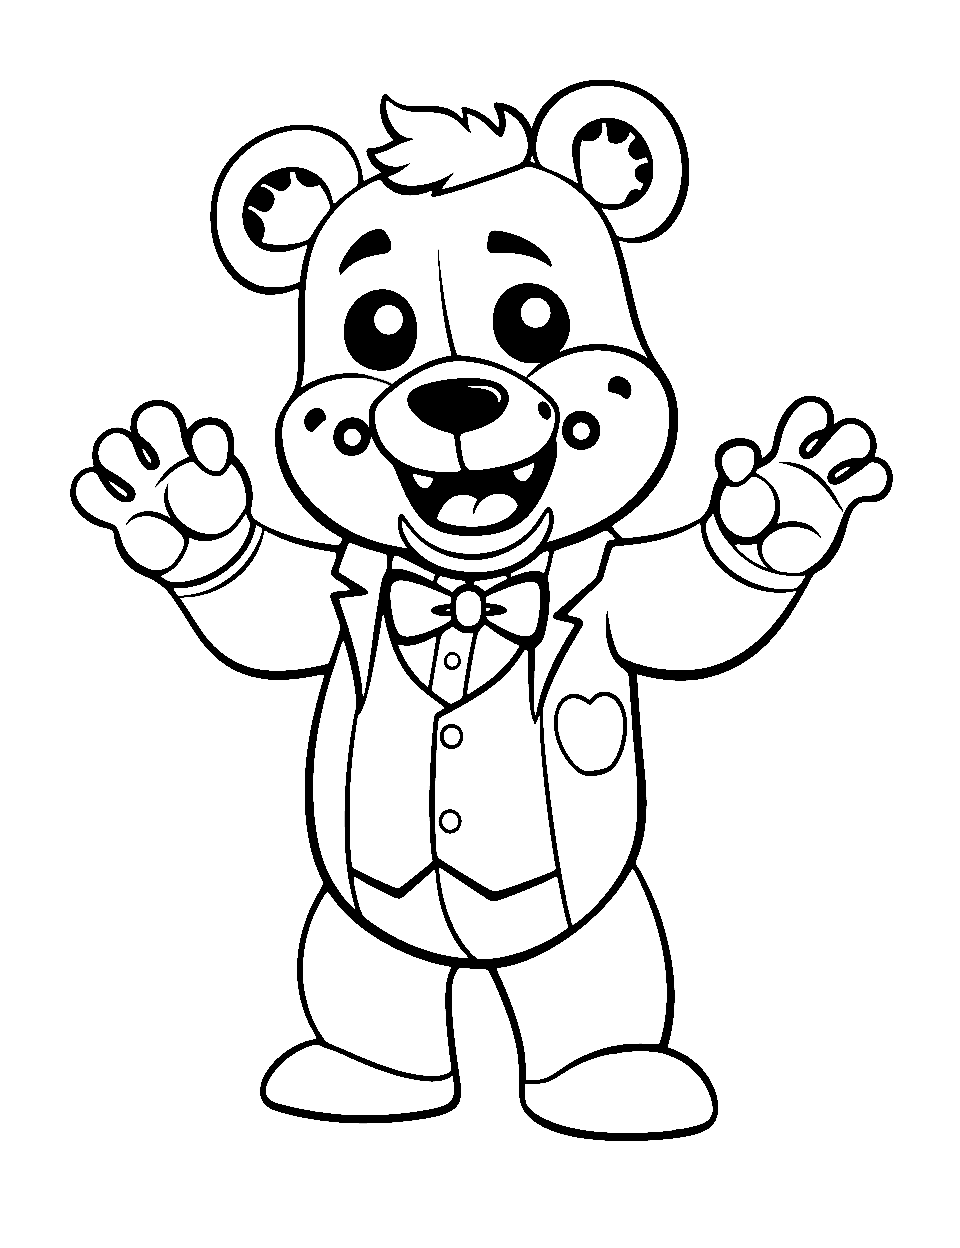 Fredbear’s Greeting Five Nights at Freddys Coloring Page - Fredbear waving a friendly hello in a welcoming disguise.